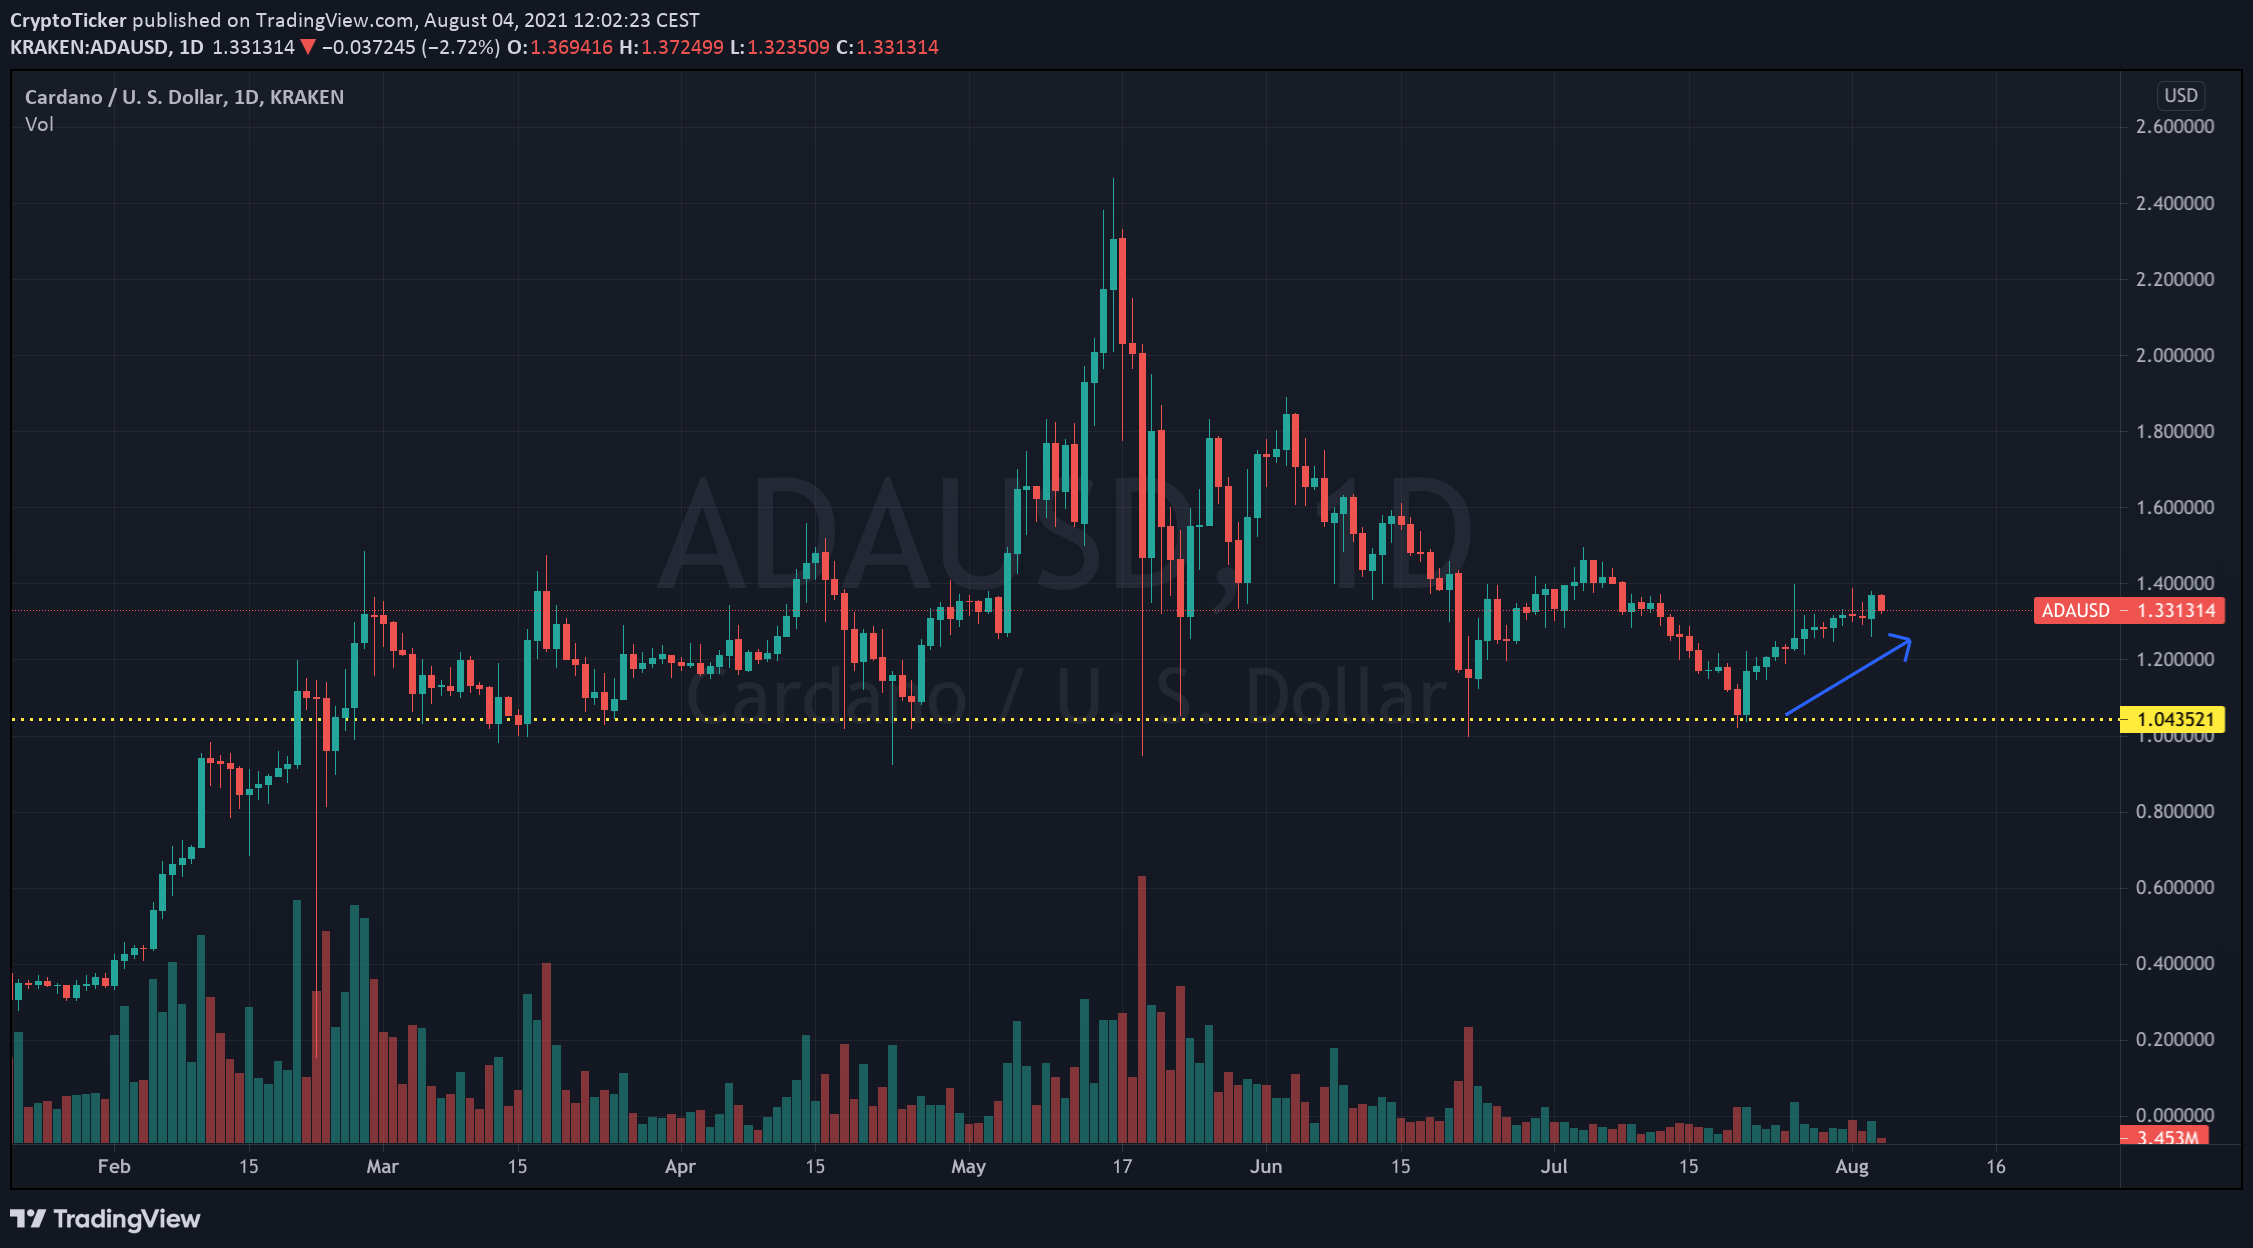 ADA/USD 1-day chart showing the latest uptrend of Cardano - Can Cardano reach 3$?